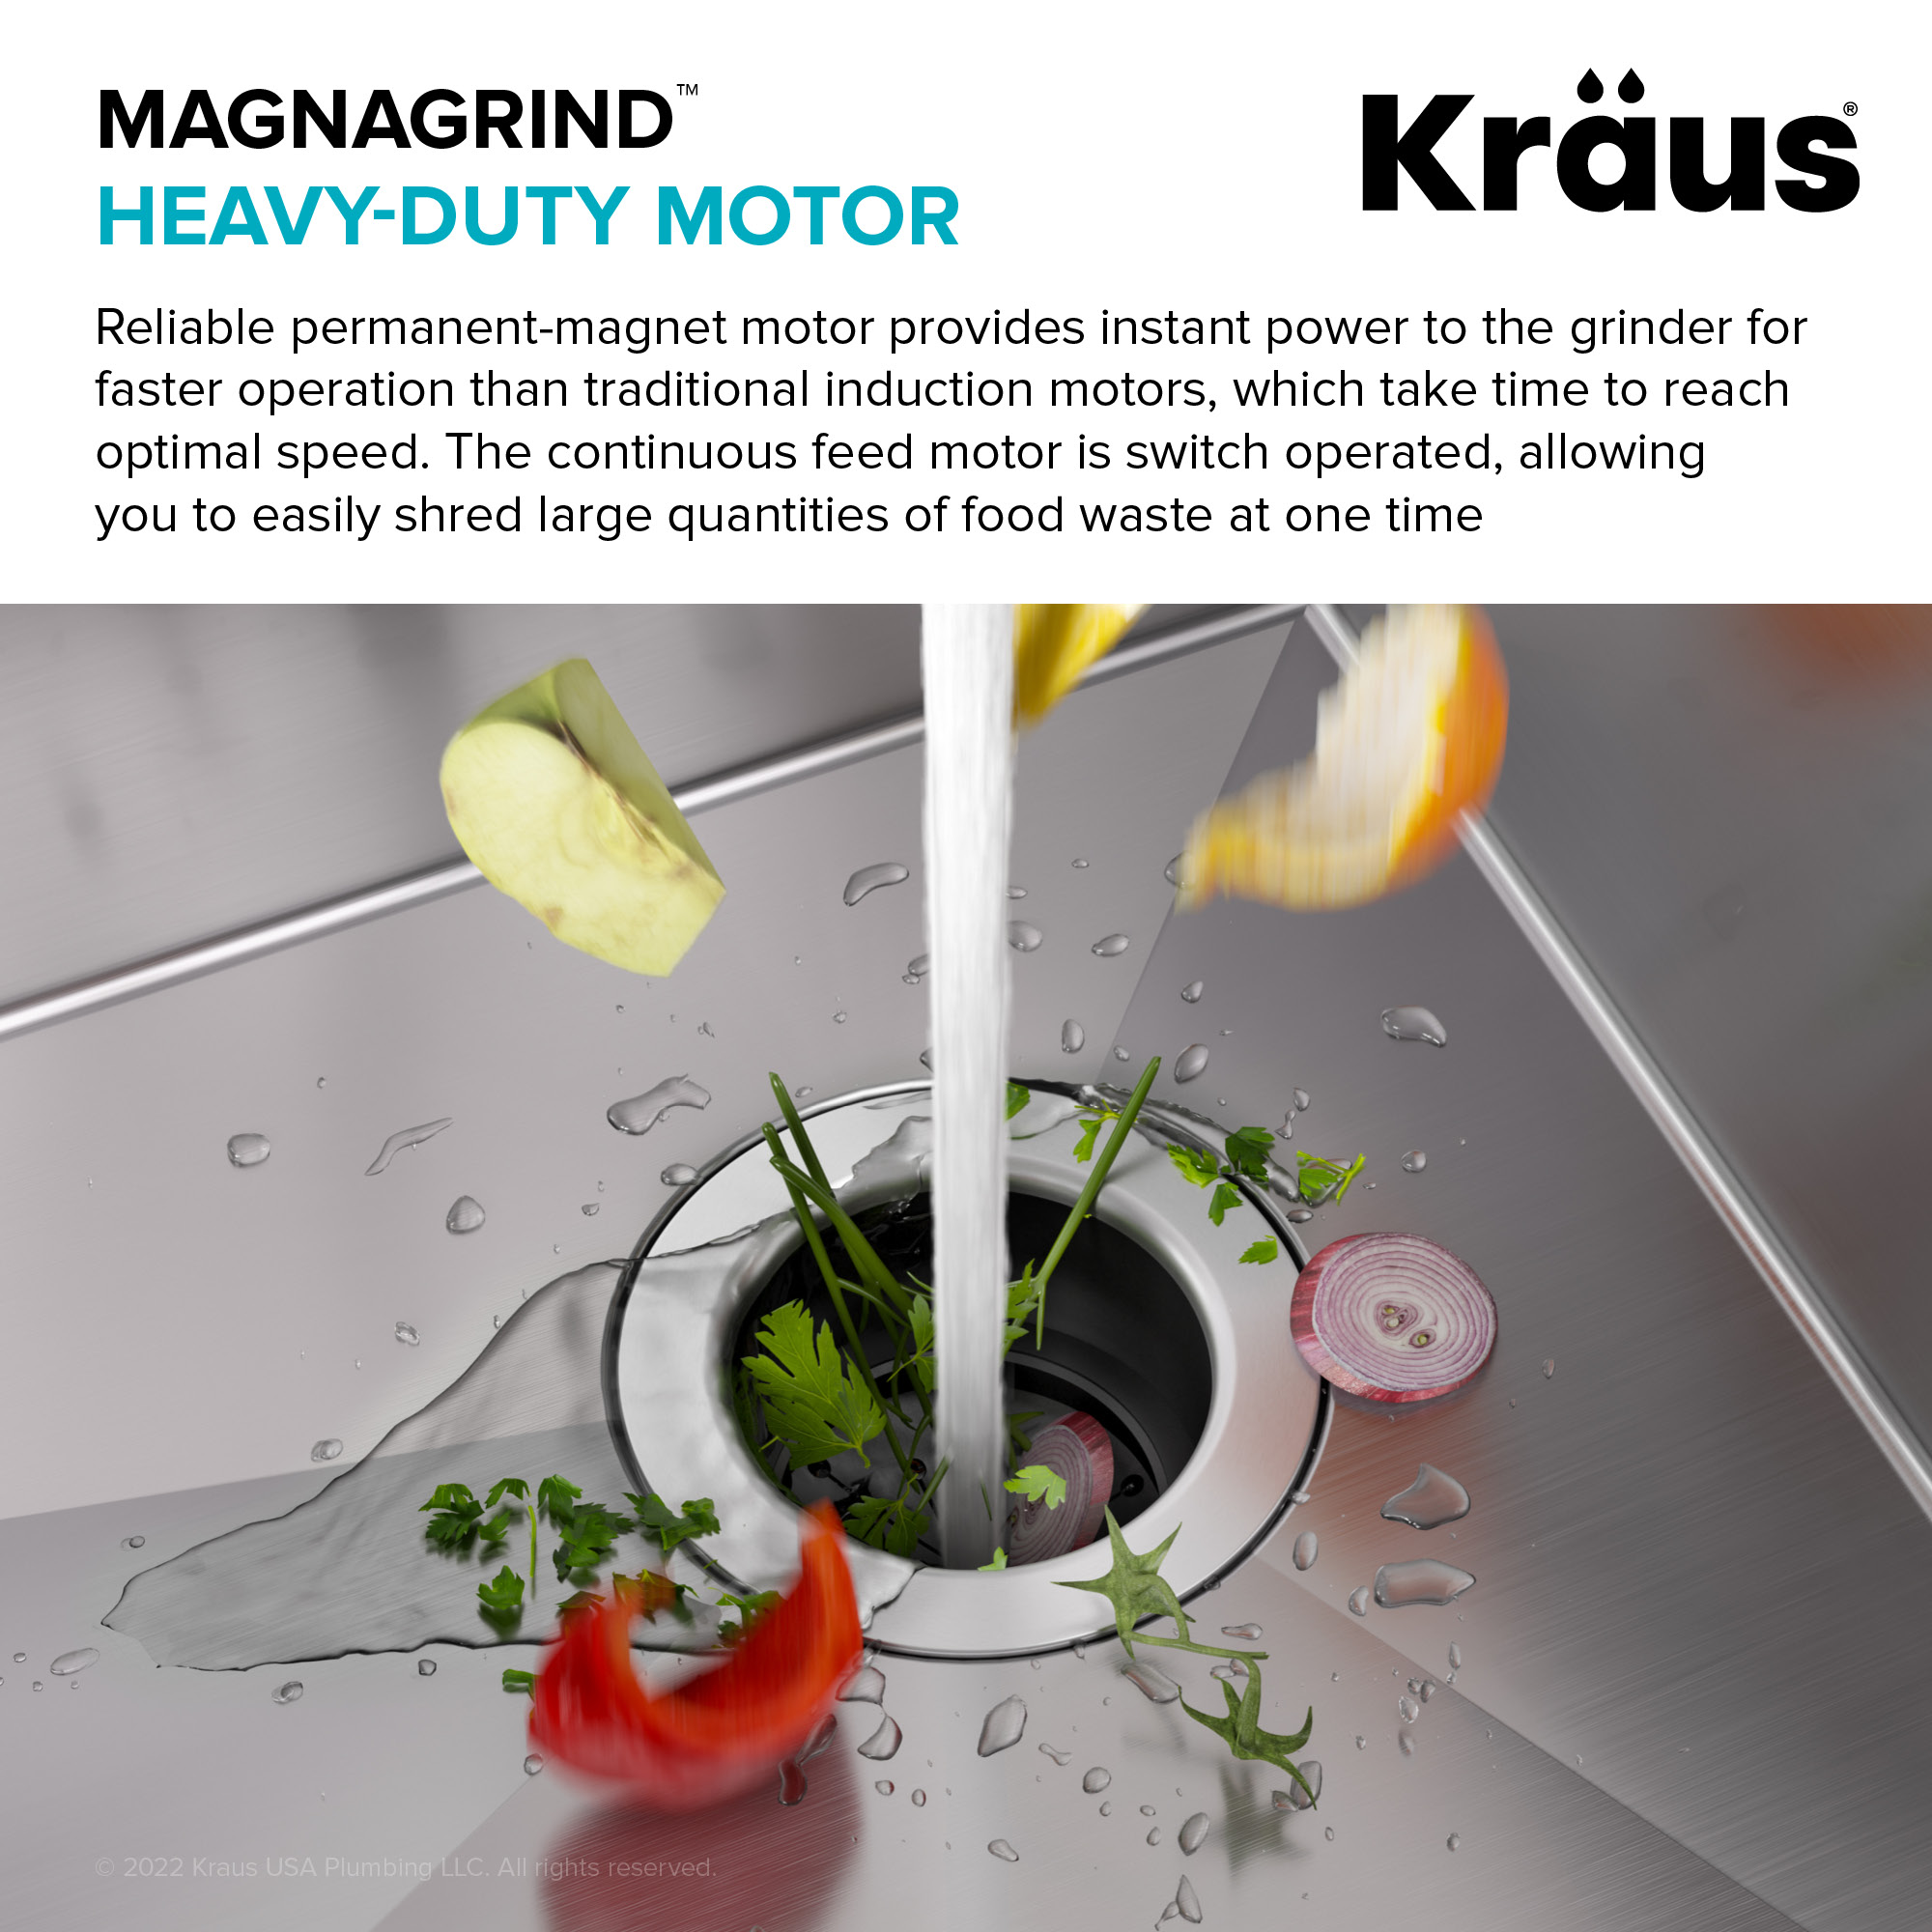 Kraus WasteGuard Corded 1-HP Continuous Feed Noise Insulation Garbage  Disposal at